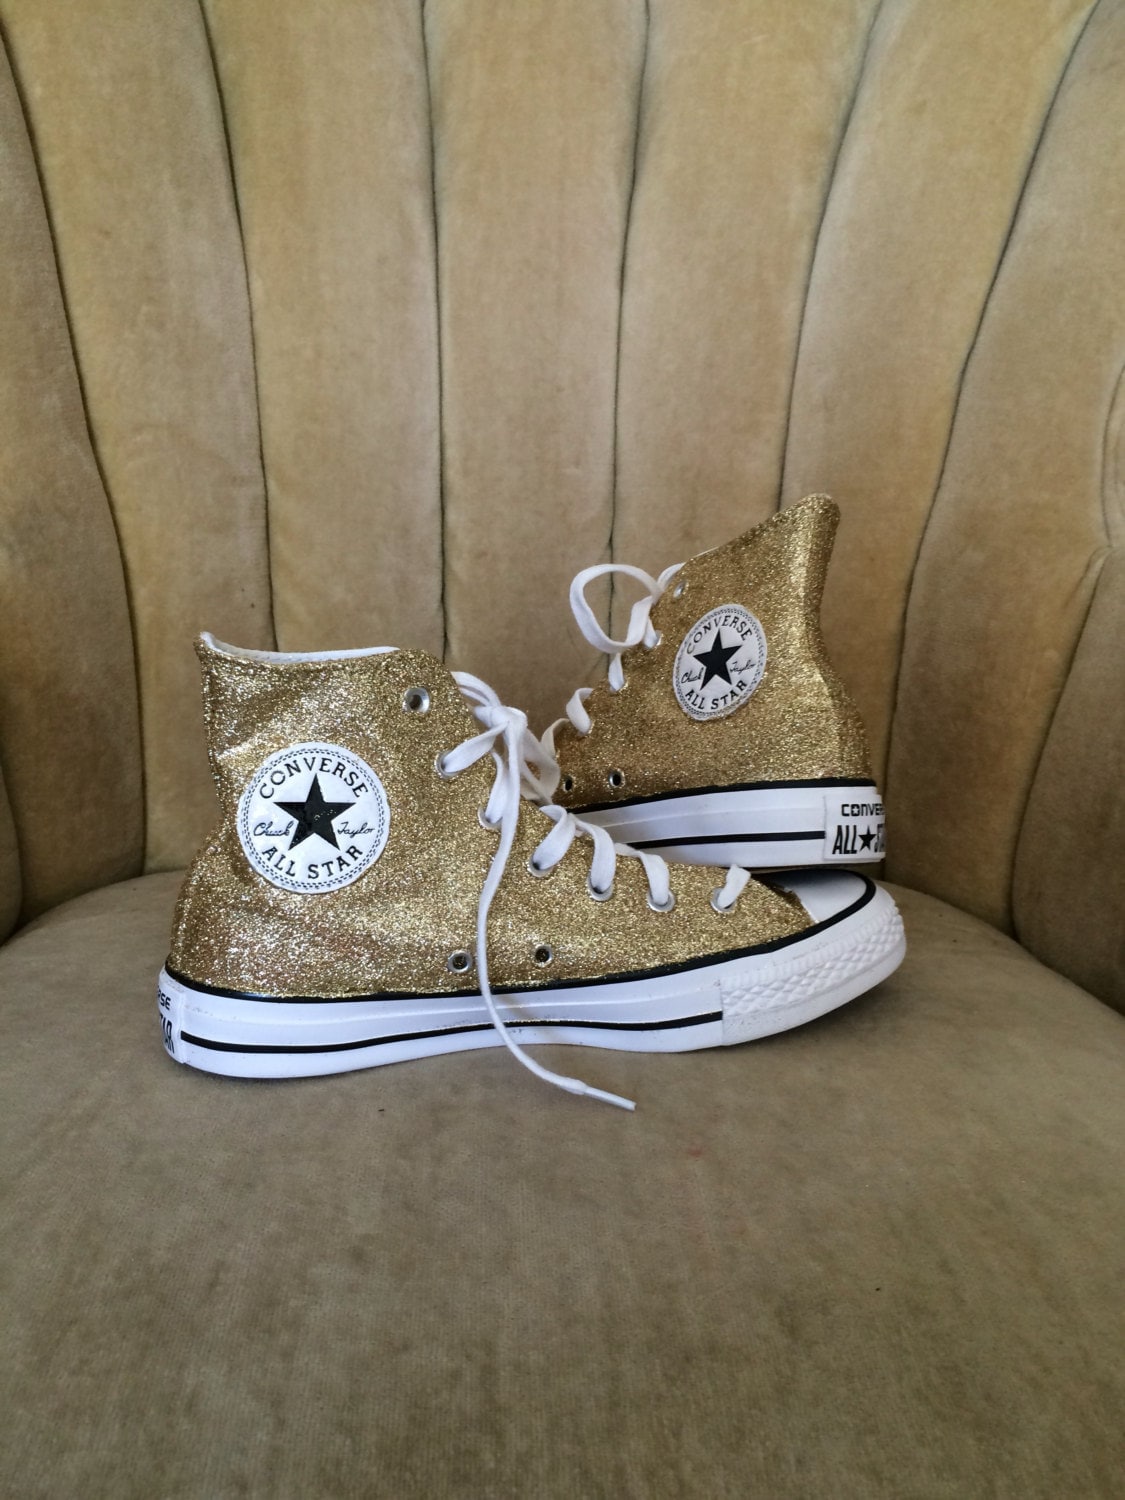 Gold Converse All Stars. - Etsy